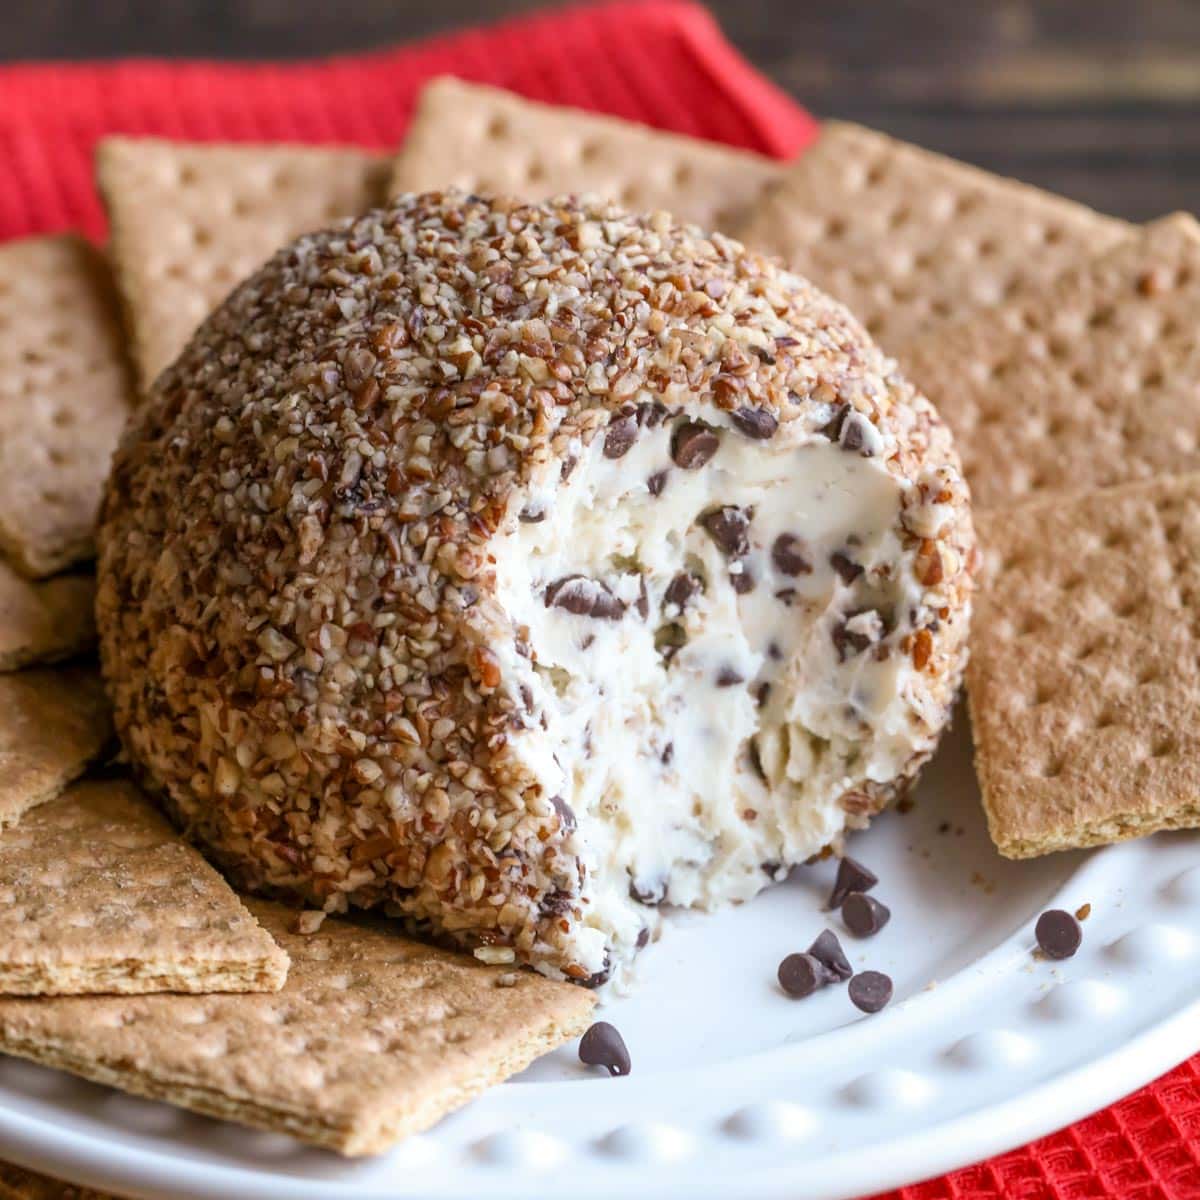 Chocolate chip cheese ball served with graham crackers on a white plate